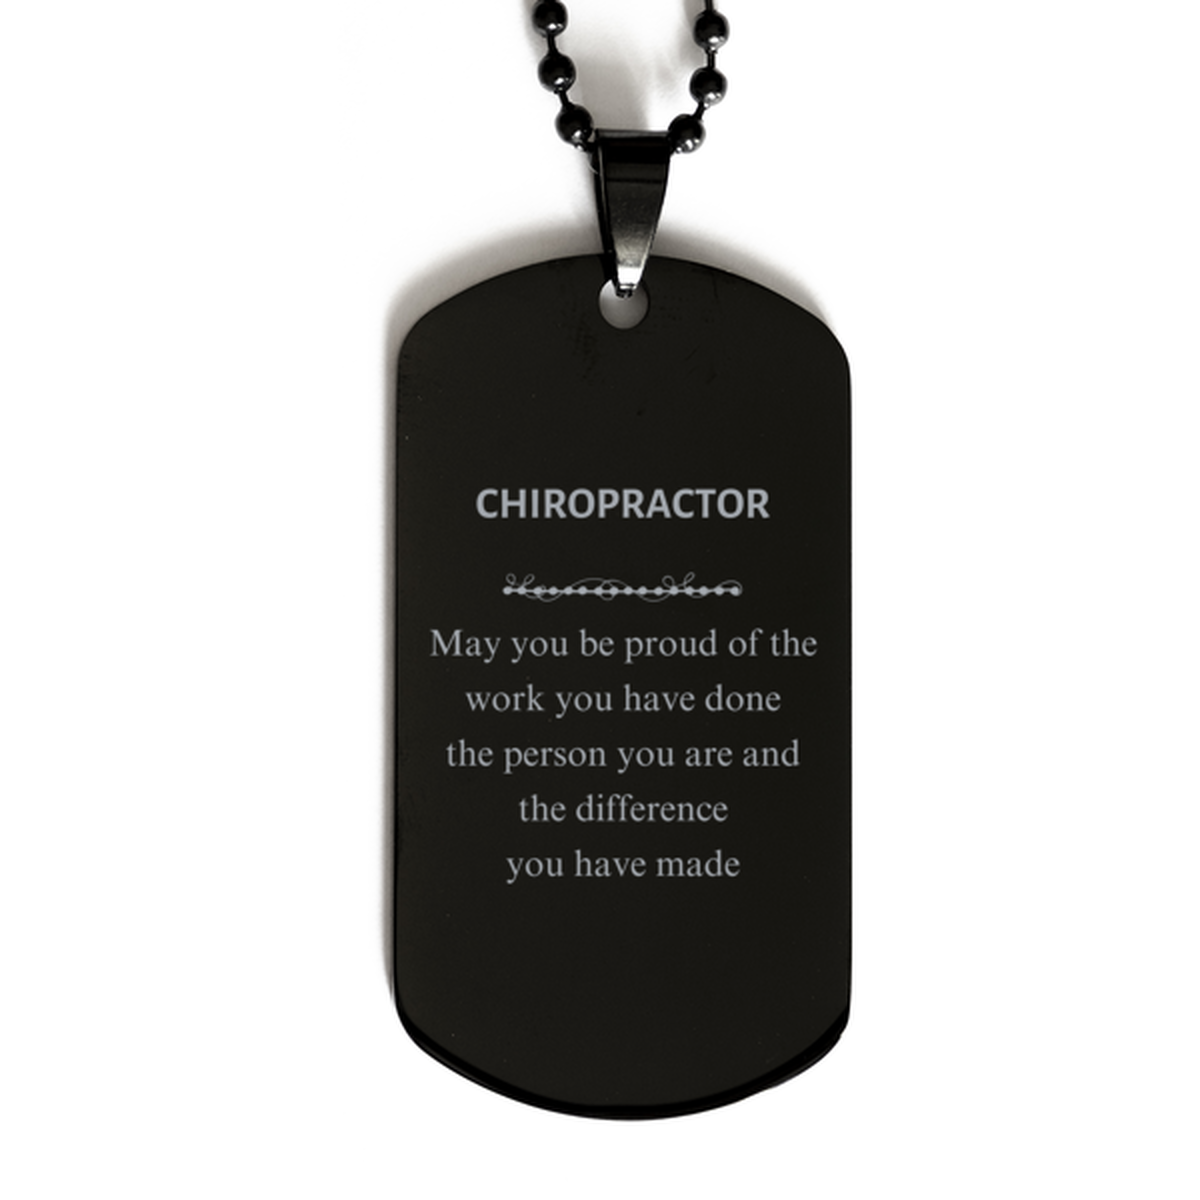 Chiropractor May you be proud of the work you have done, Retirement Chiropractor Black Dog Tag for Colleague Appreciation Gifts Amazing for Chiropractor